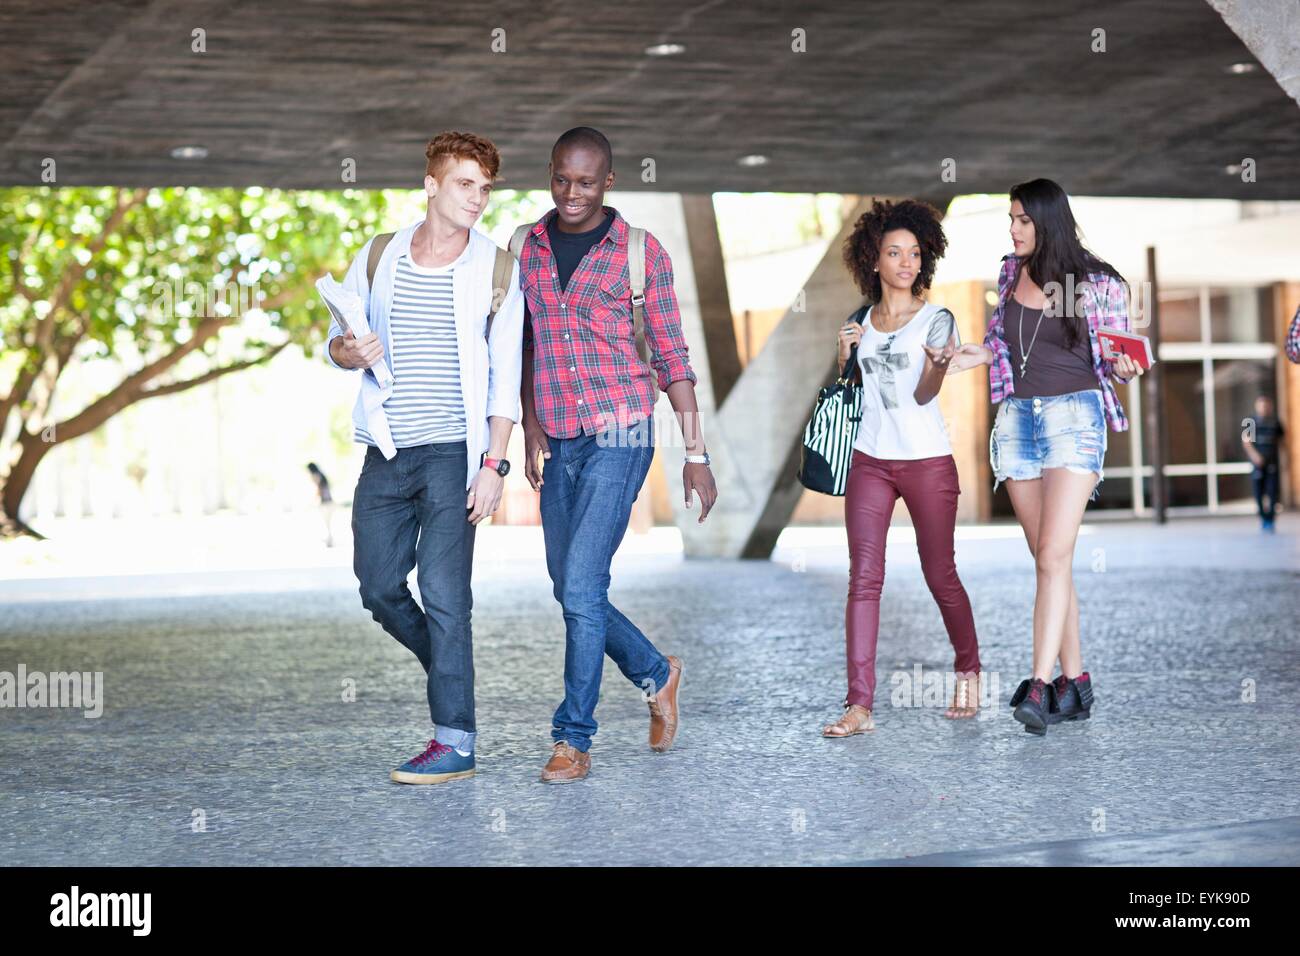 Higher education students Stock Photo